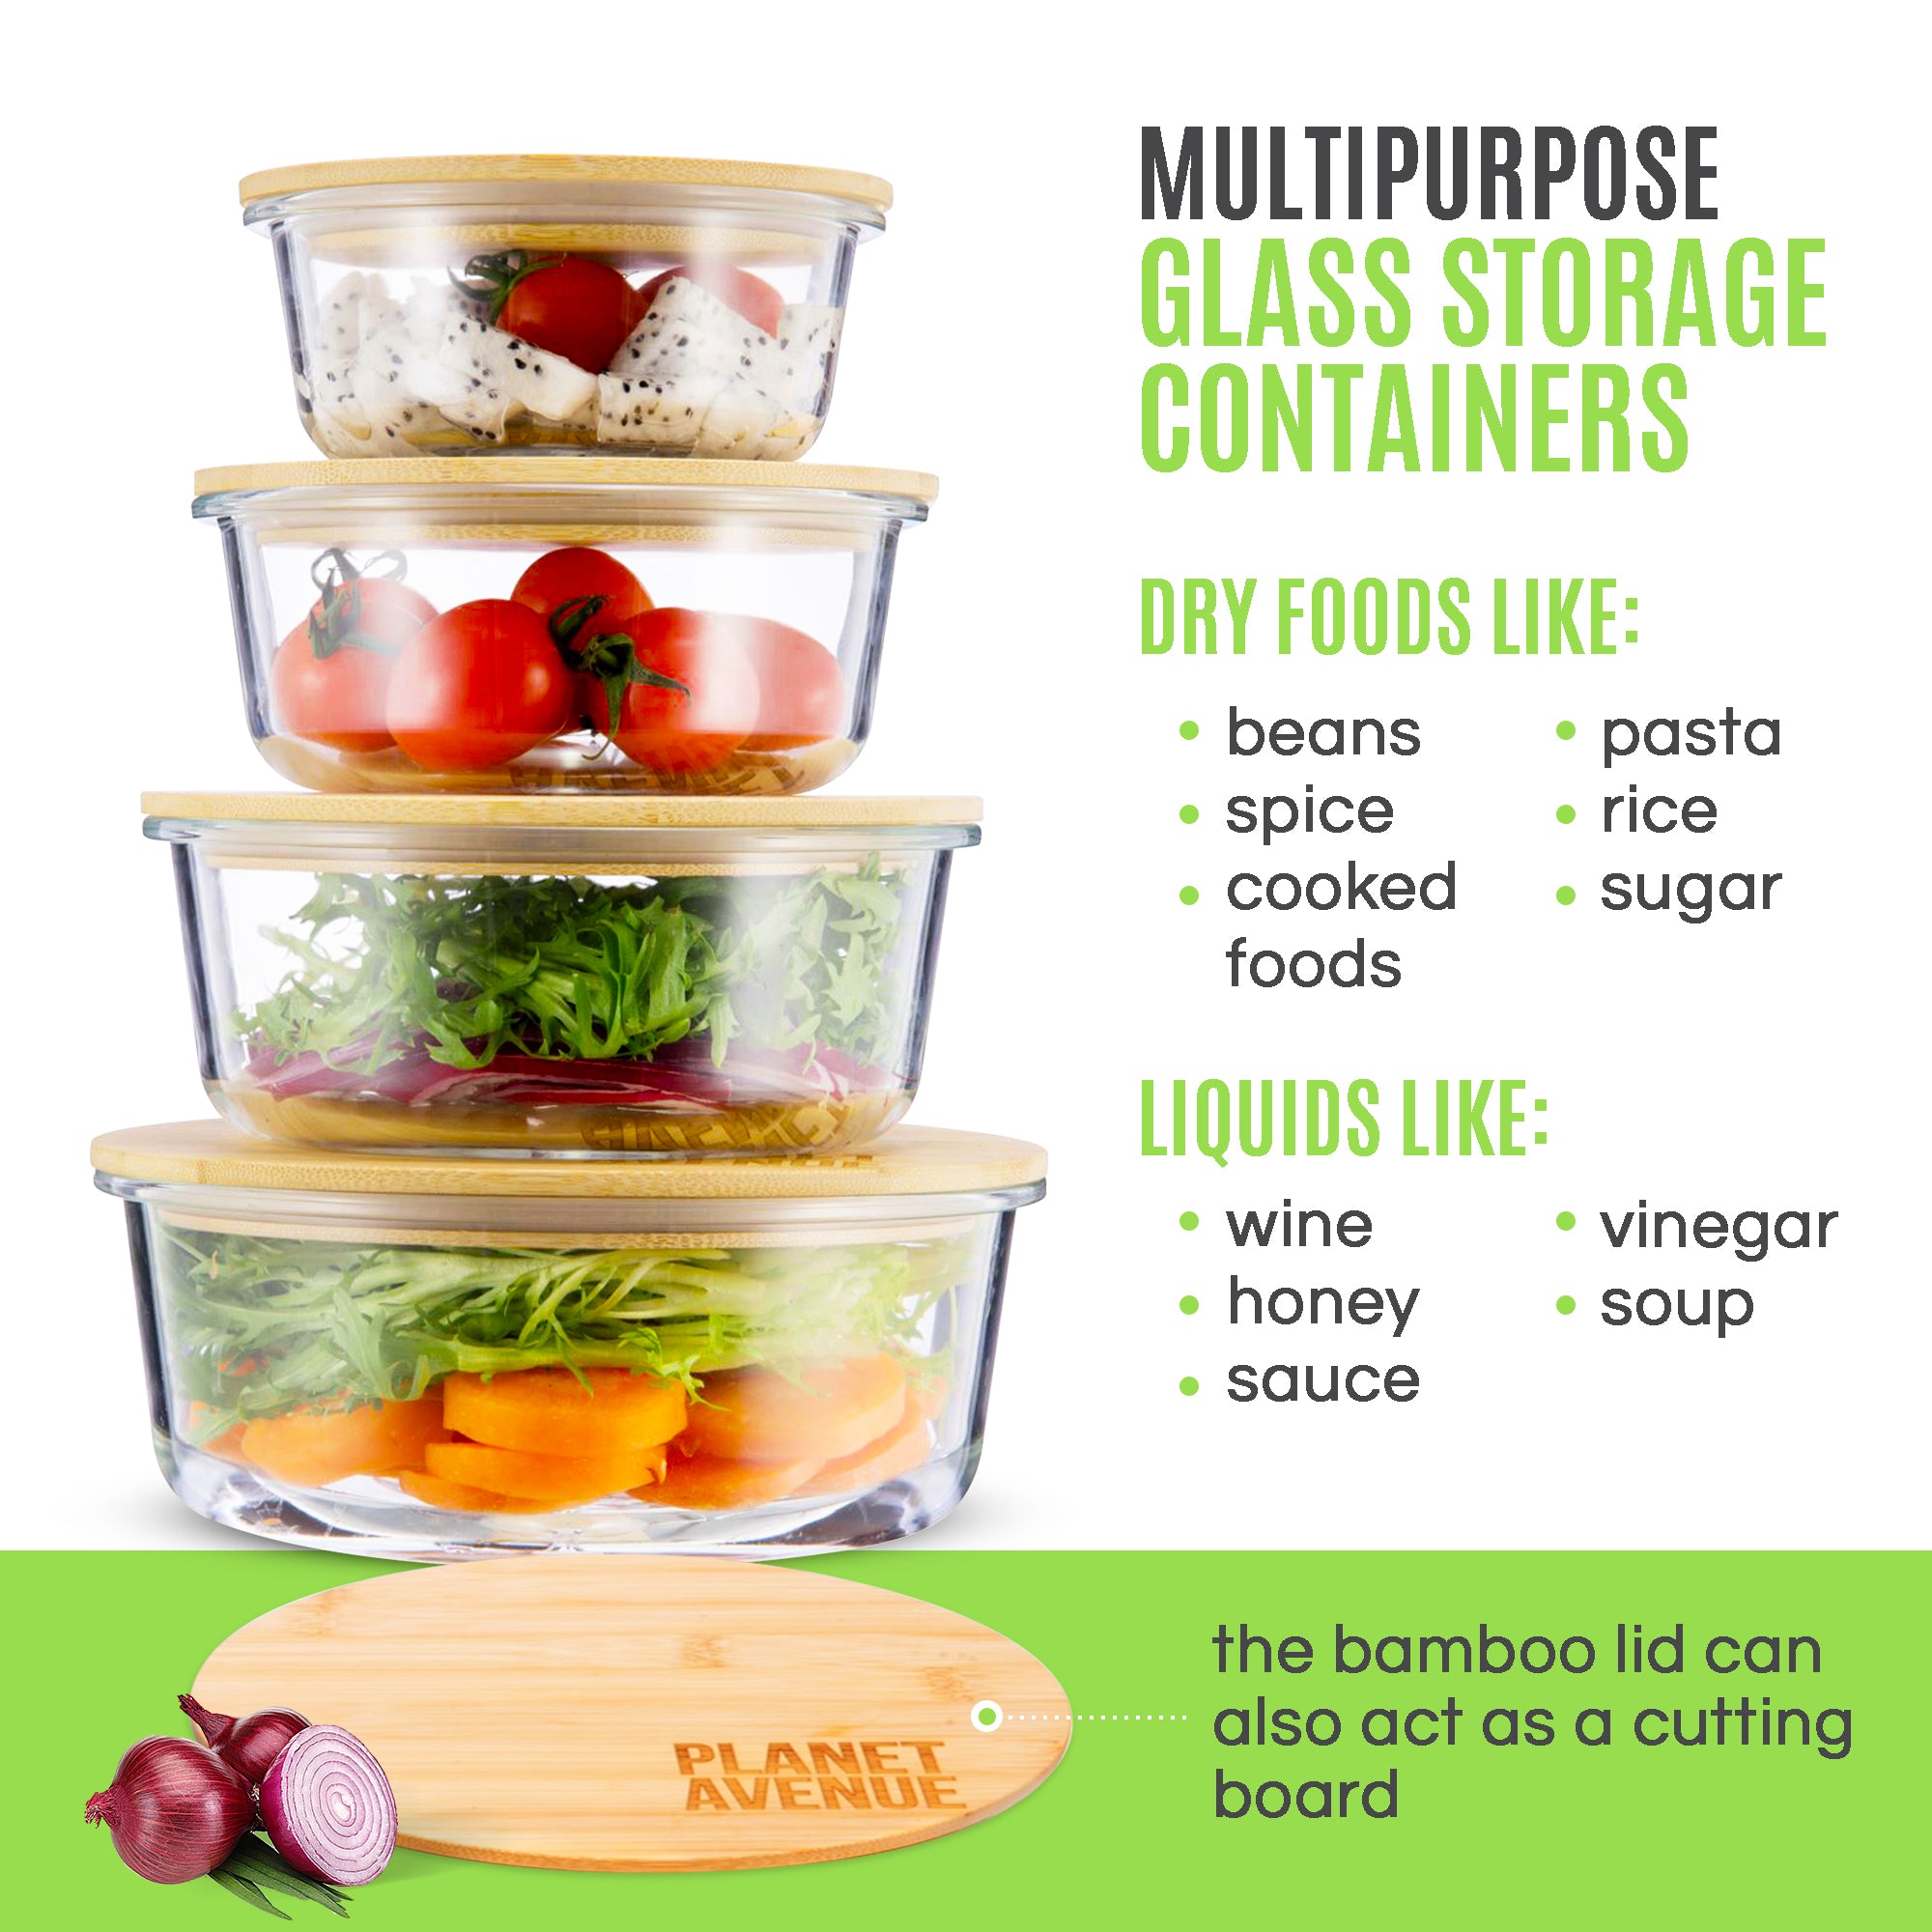 EcoPreps Glass Meal Prep Containers with Bamboo Lids, 2 Compartment Glass Bento Box Containers【3 Pack】 100% Plastic Free, Eco-Friendly, Glass Food